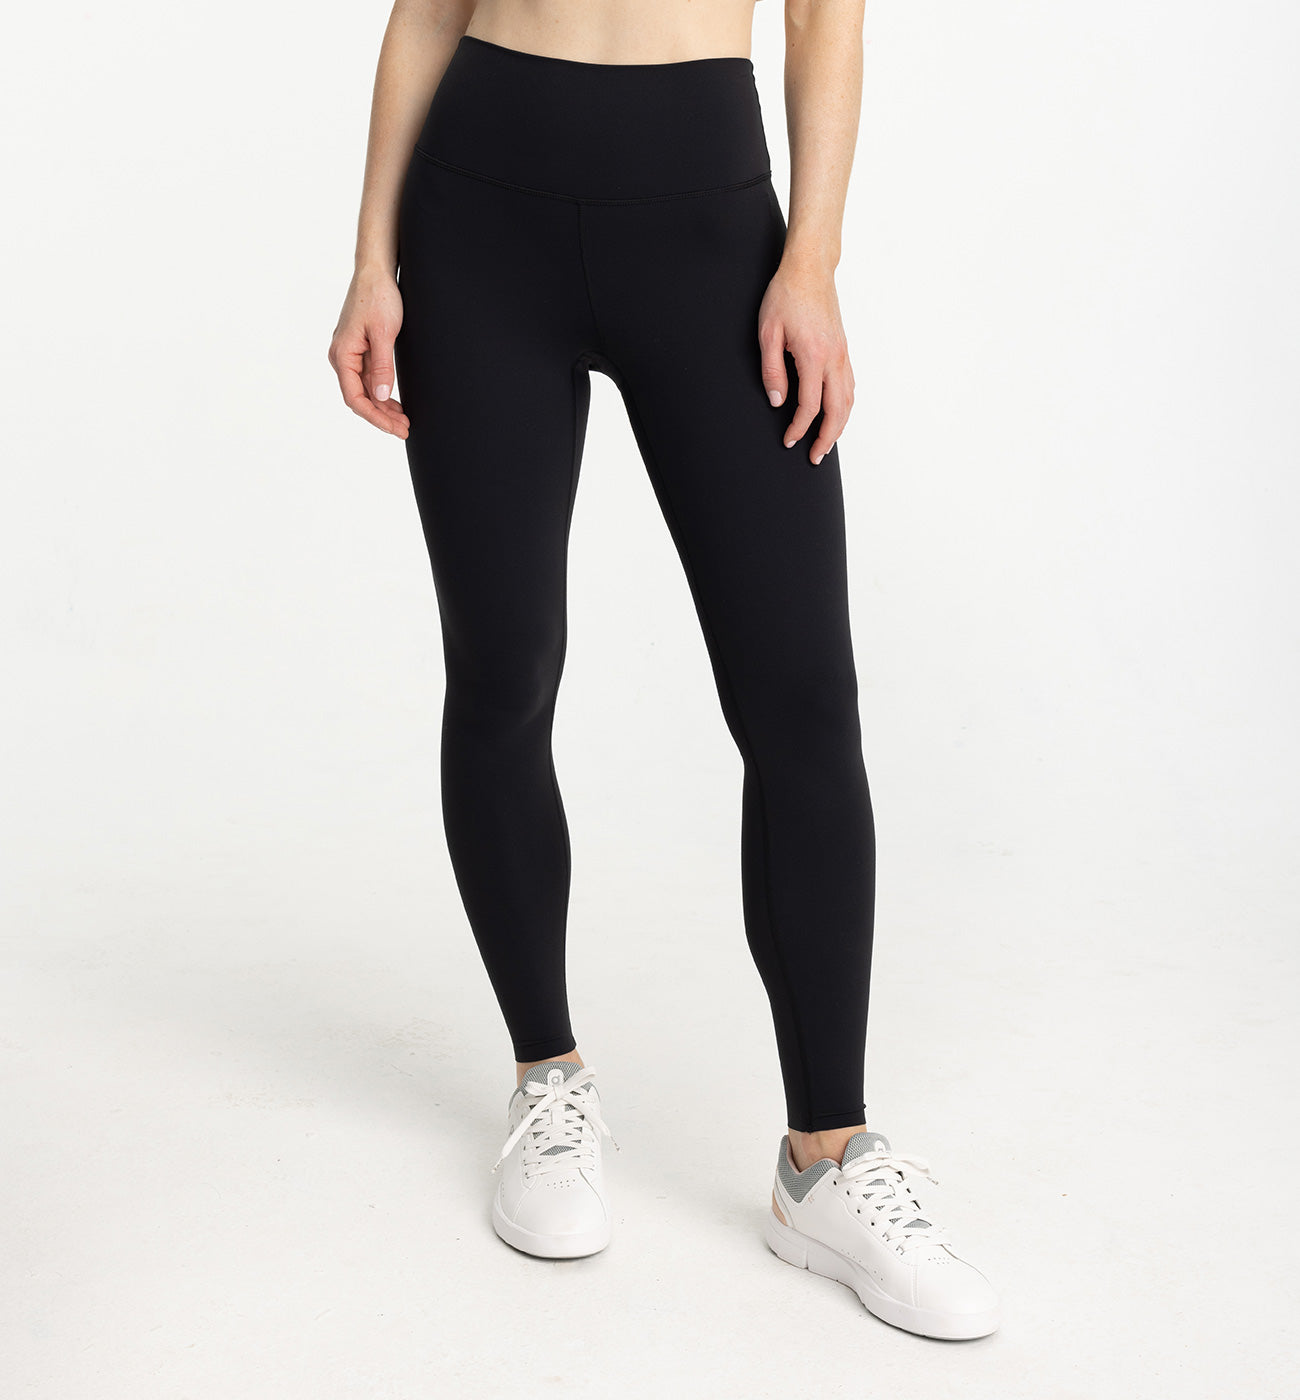 High Waist Stretch Yoga All In Motion Leggings With Pockets For